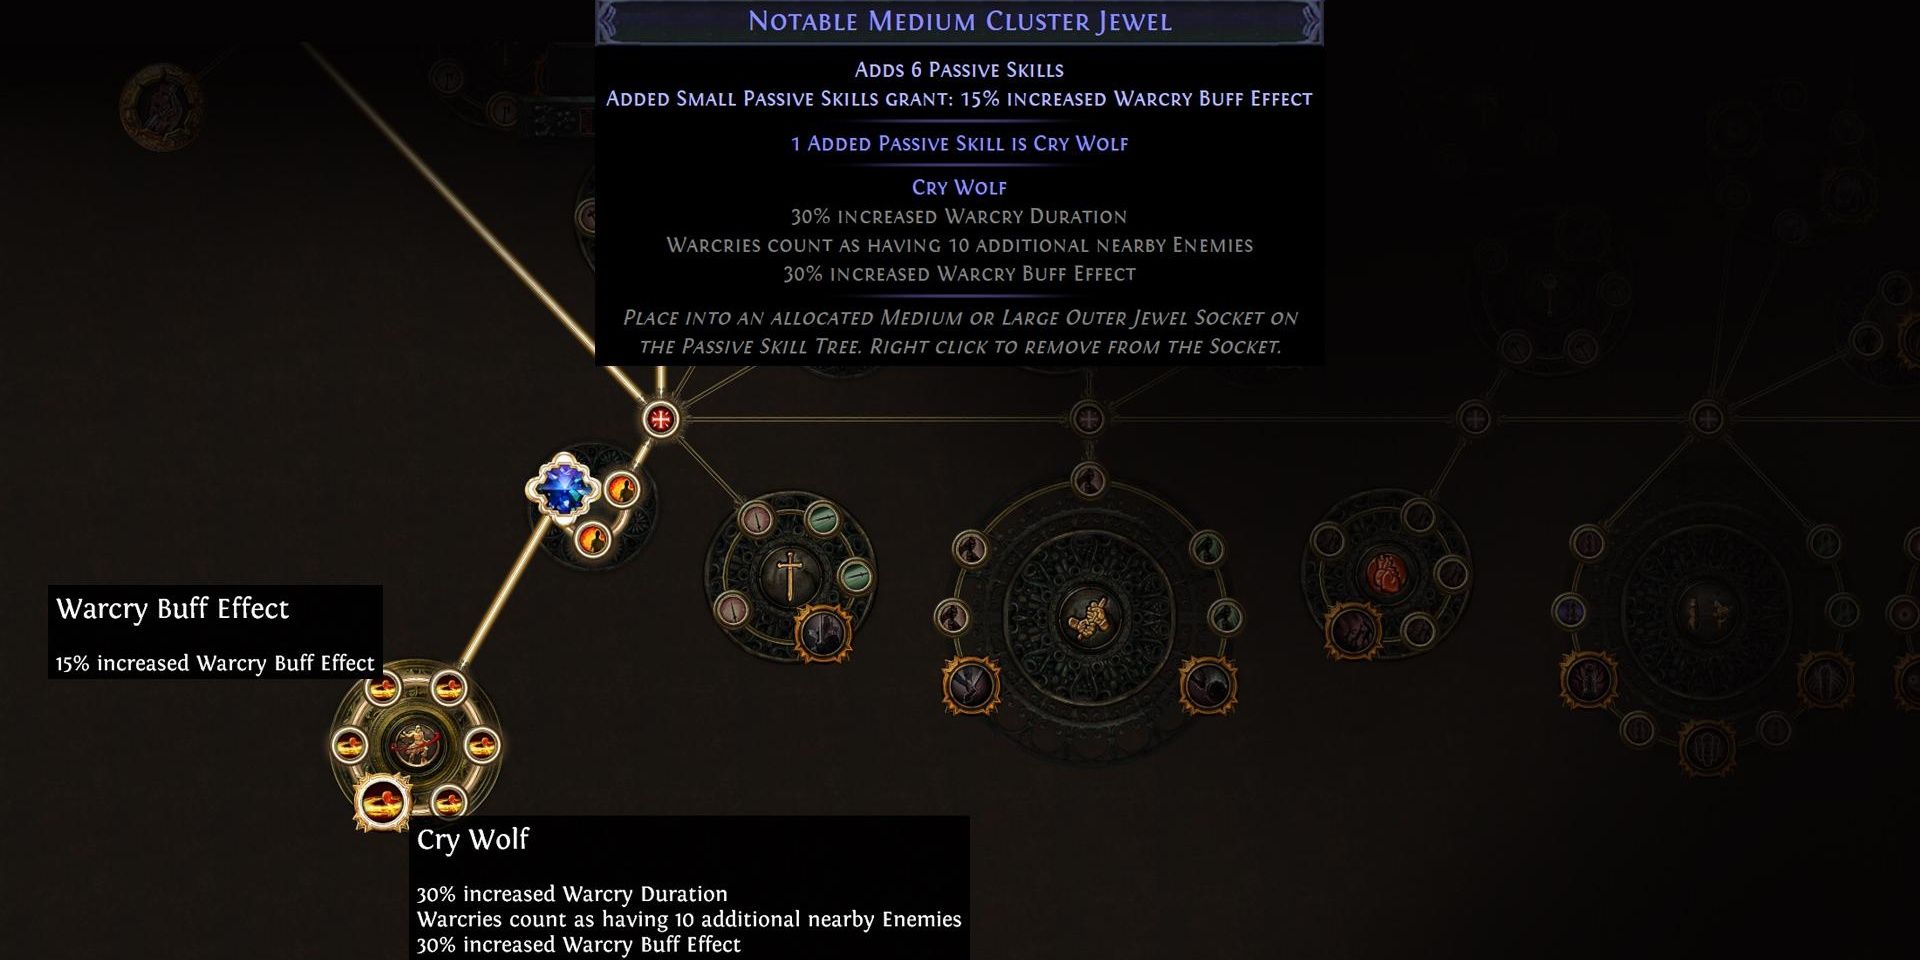 Path of Exile Cluster Jewel Warcry nodes.